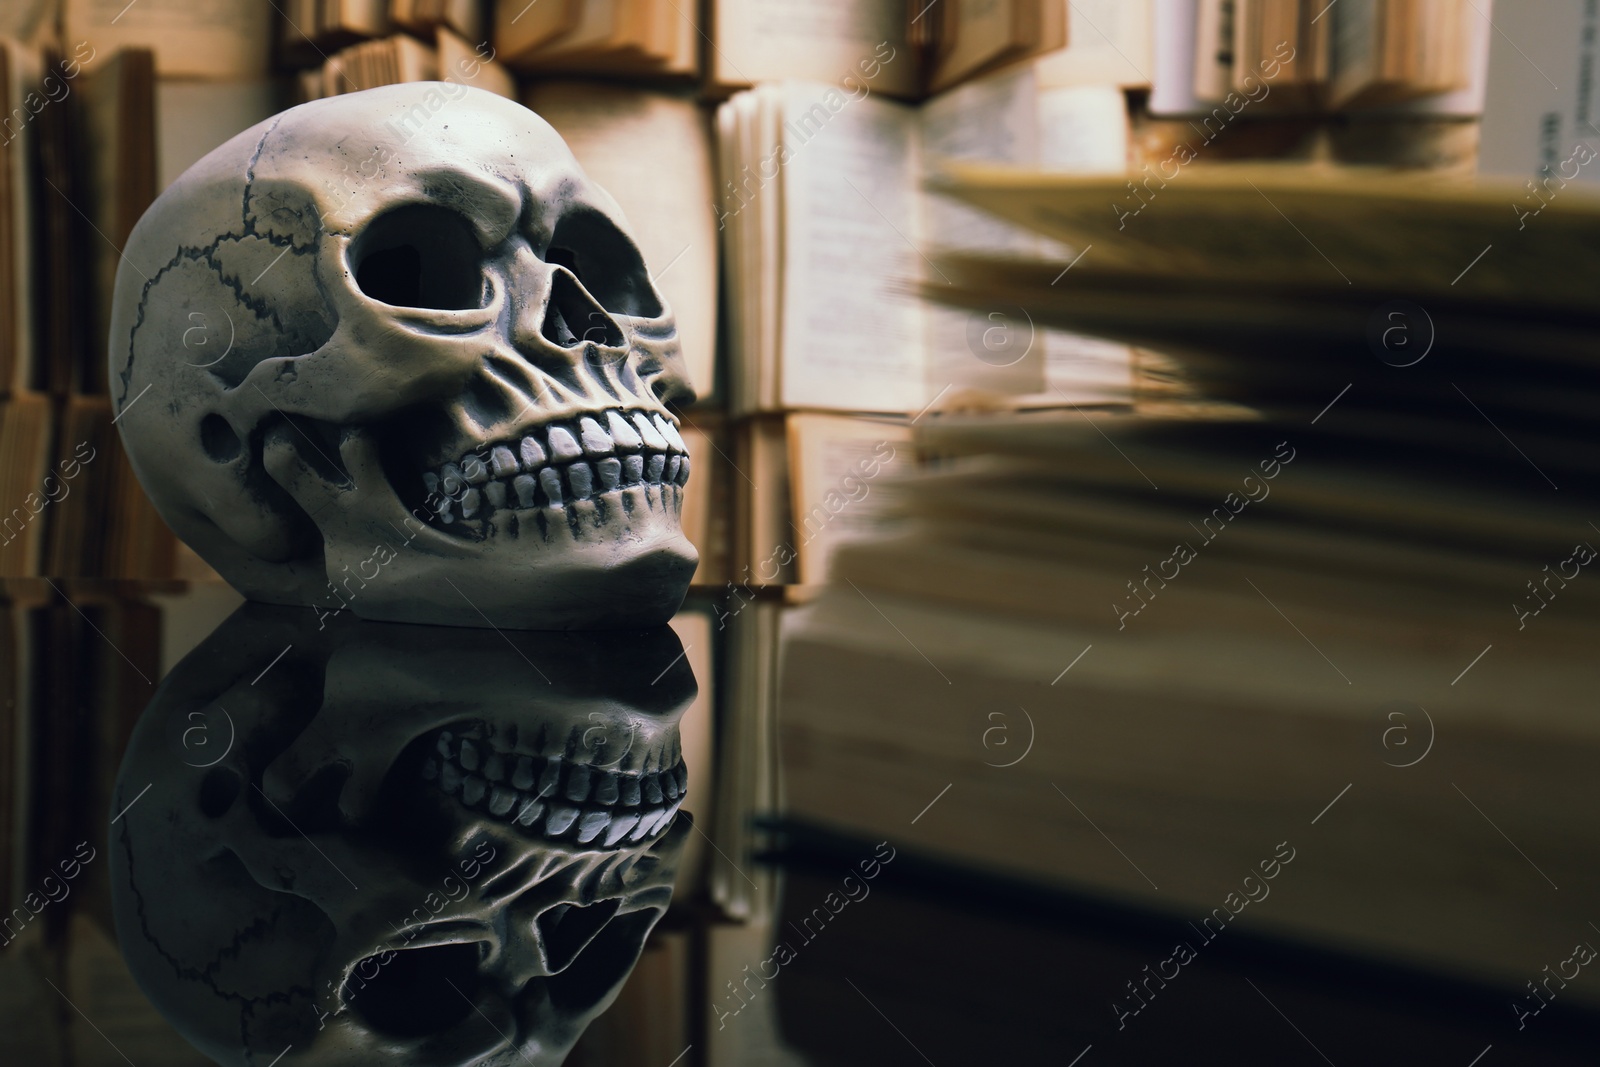 Photo of Human skull and old book on mirror table